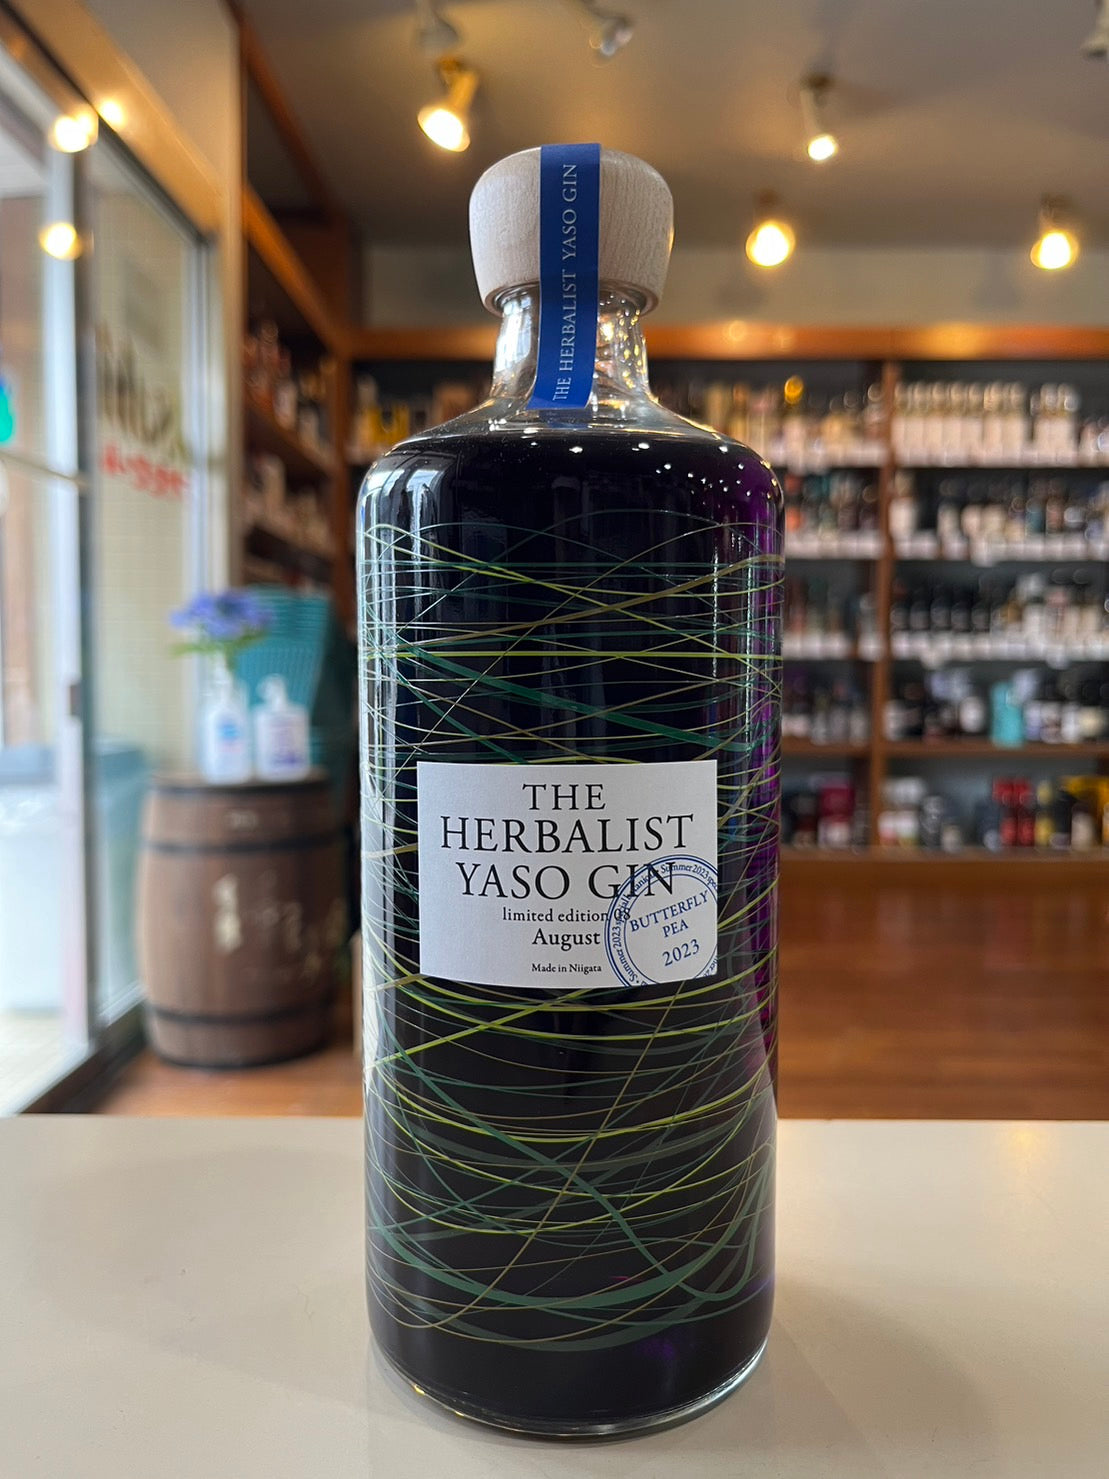 THE　HERBALIST　YASO　GIN　limited edition08　BUTTERFLY PEA ヤソ　ジン　バタフライピー